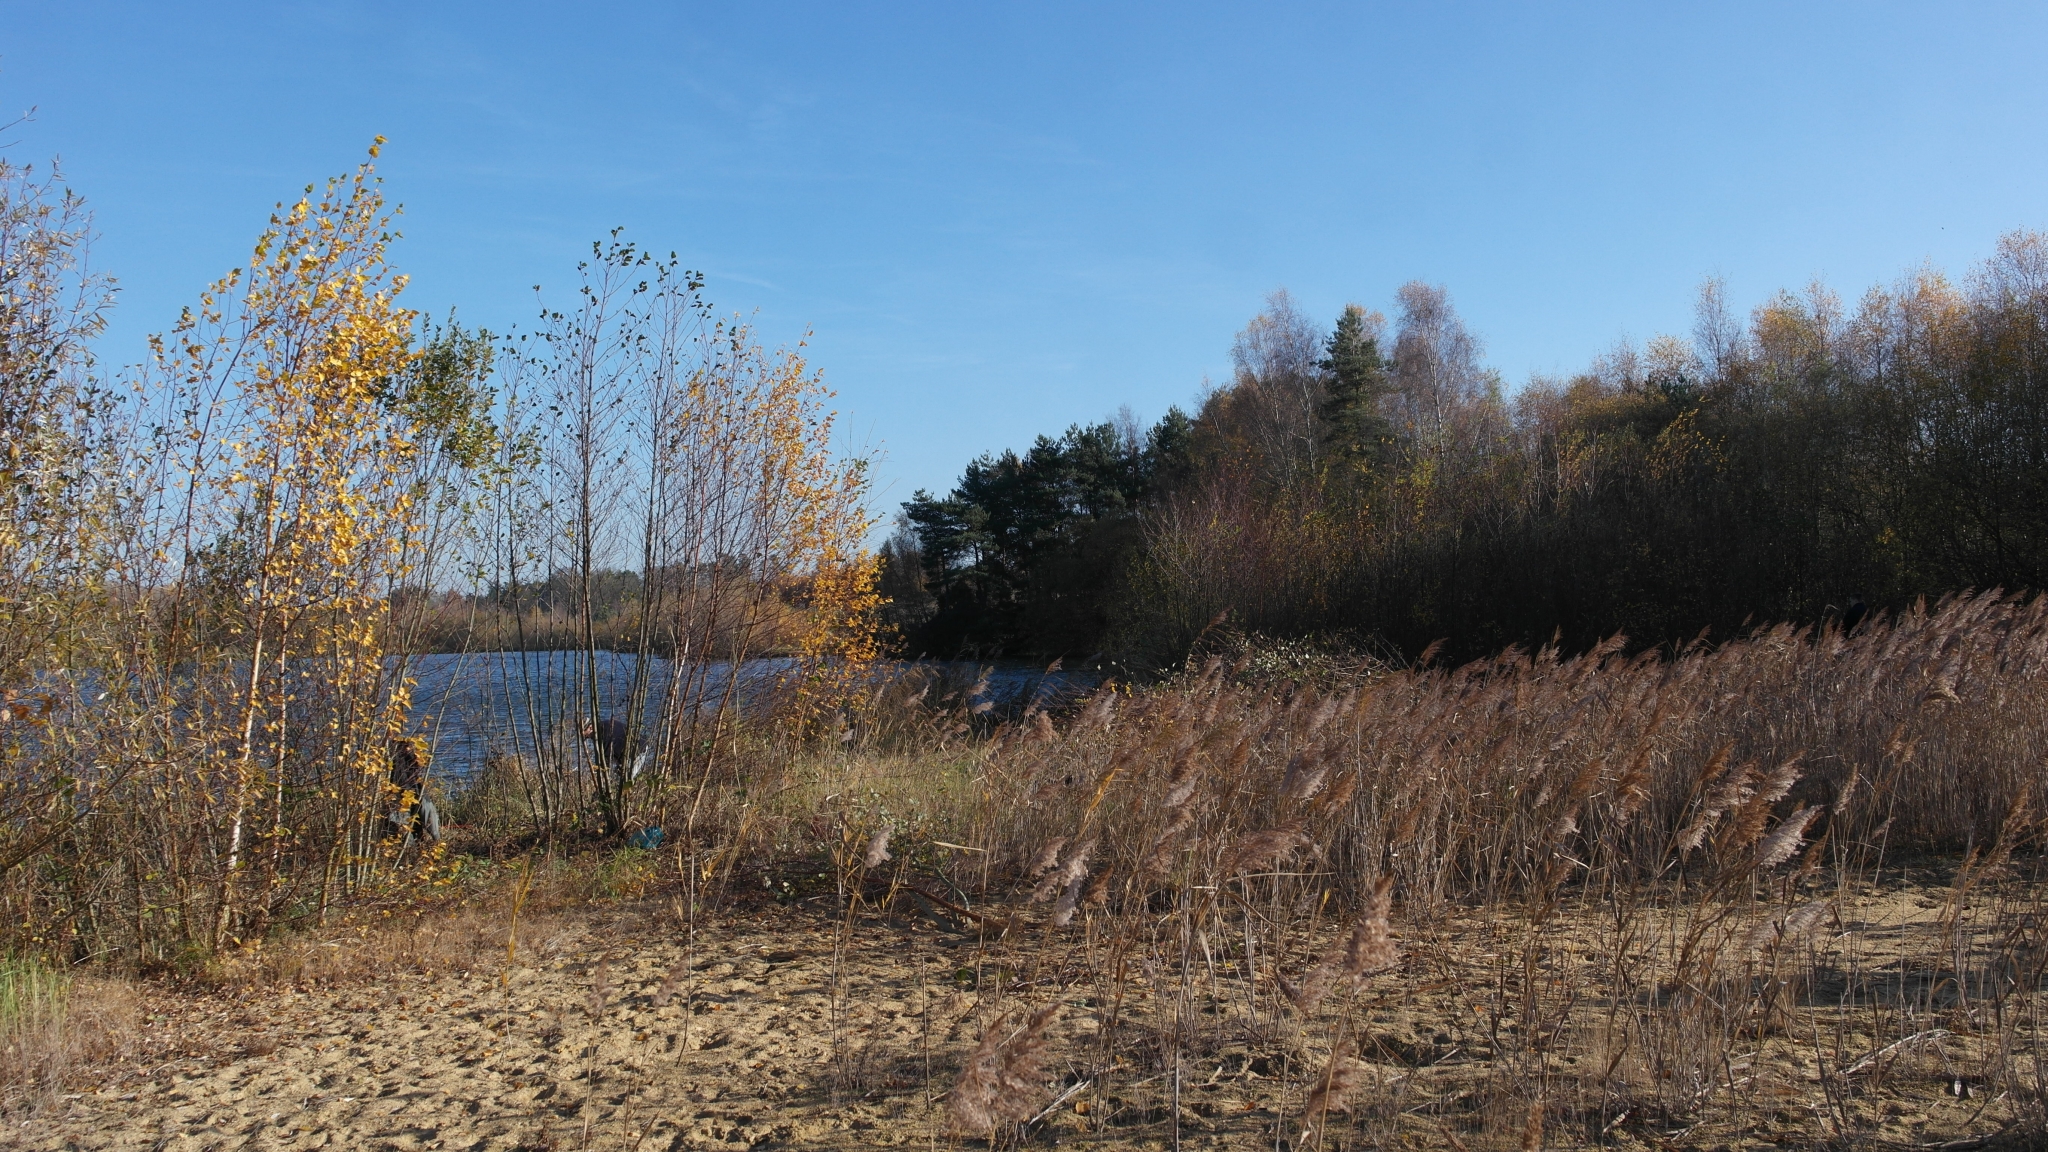 A photo from the FoTF Conservation Event - November 2018 - Undetaking clearance at the Lynford Lake Waters Edge : A shot of Lynford Lake